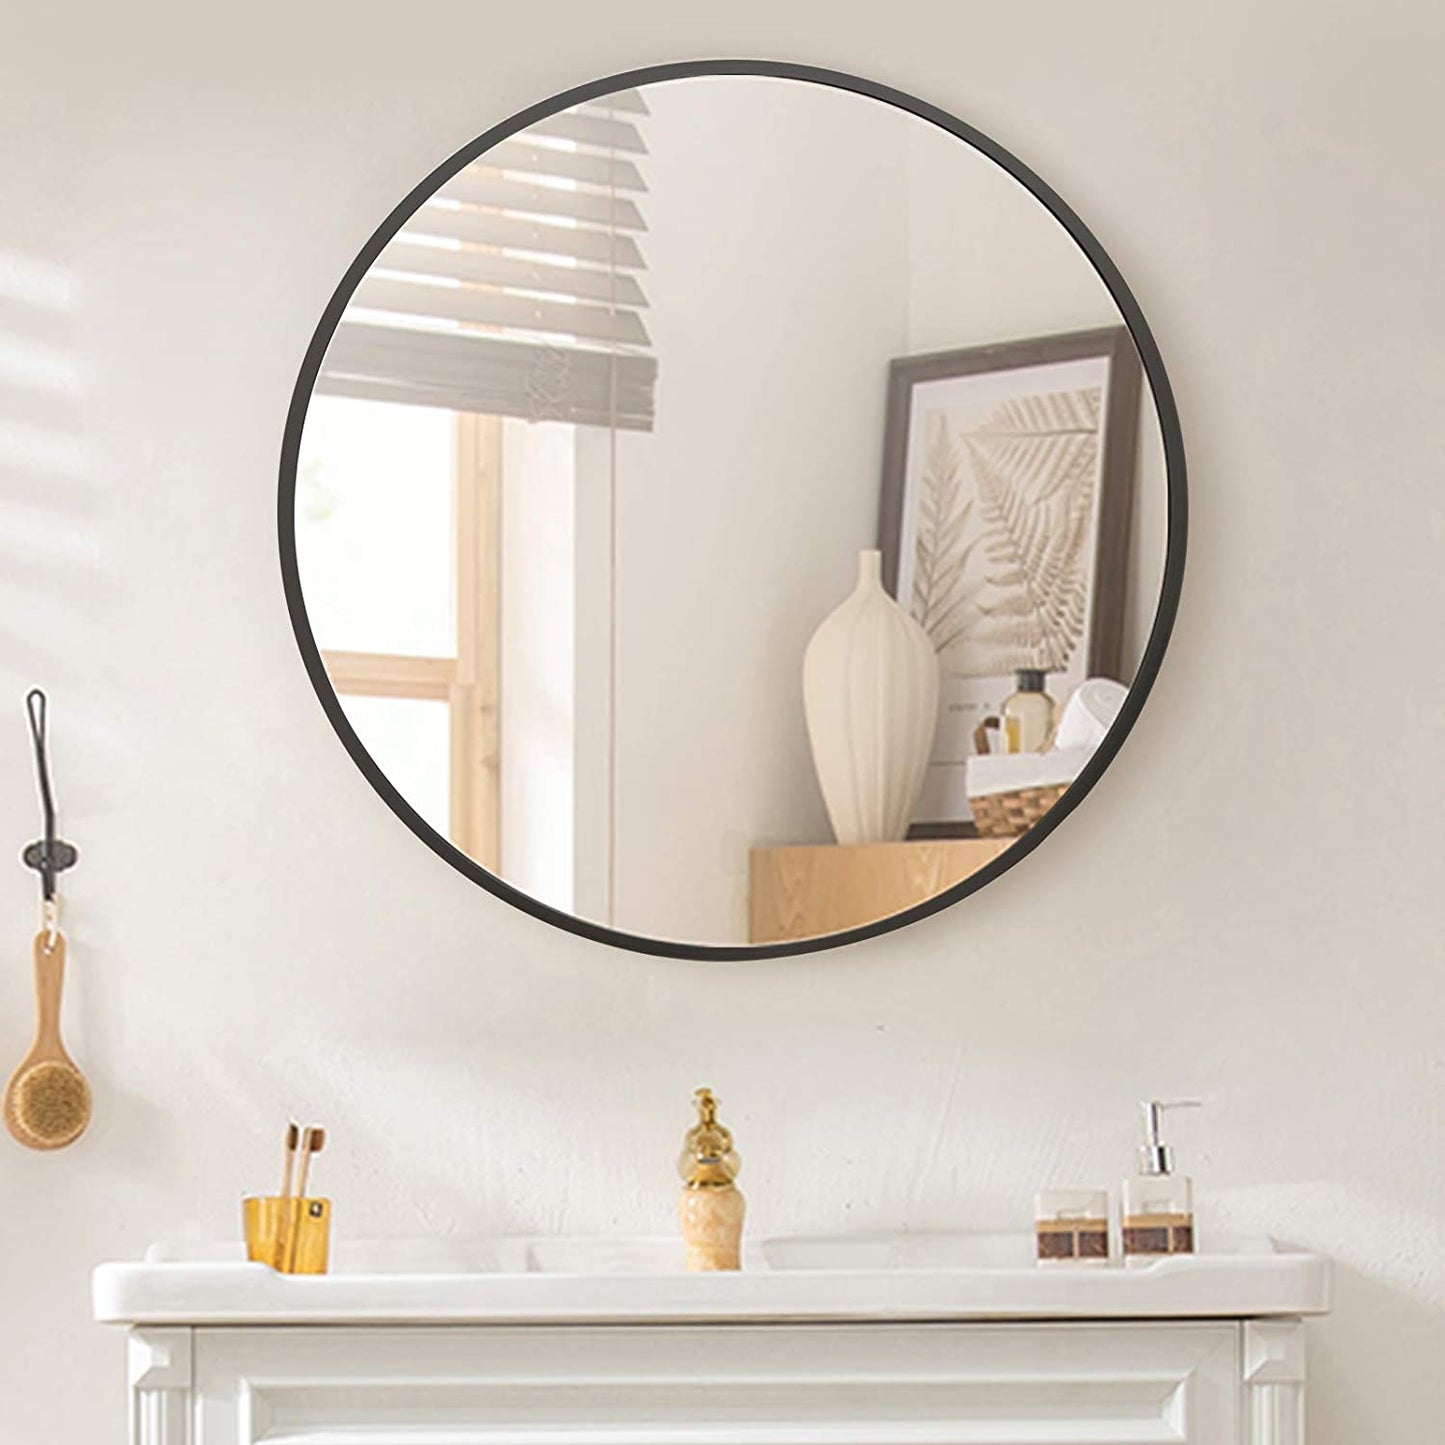 Beautiful Small Wall round mirror | Gold & Black color available |18"